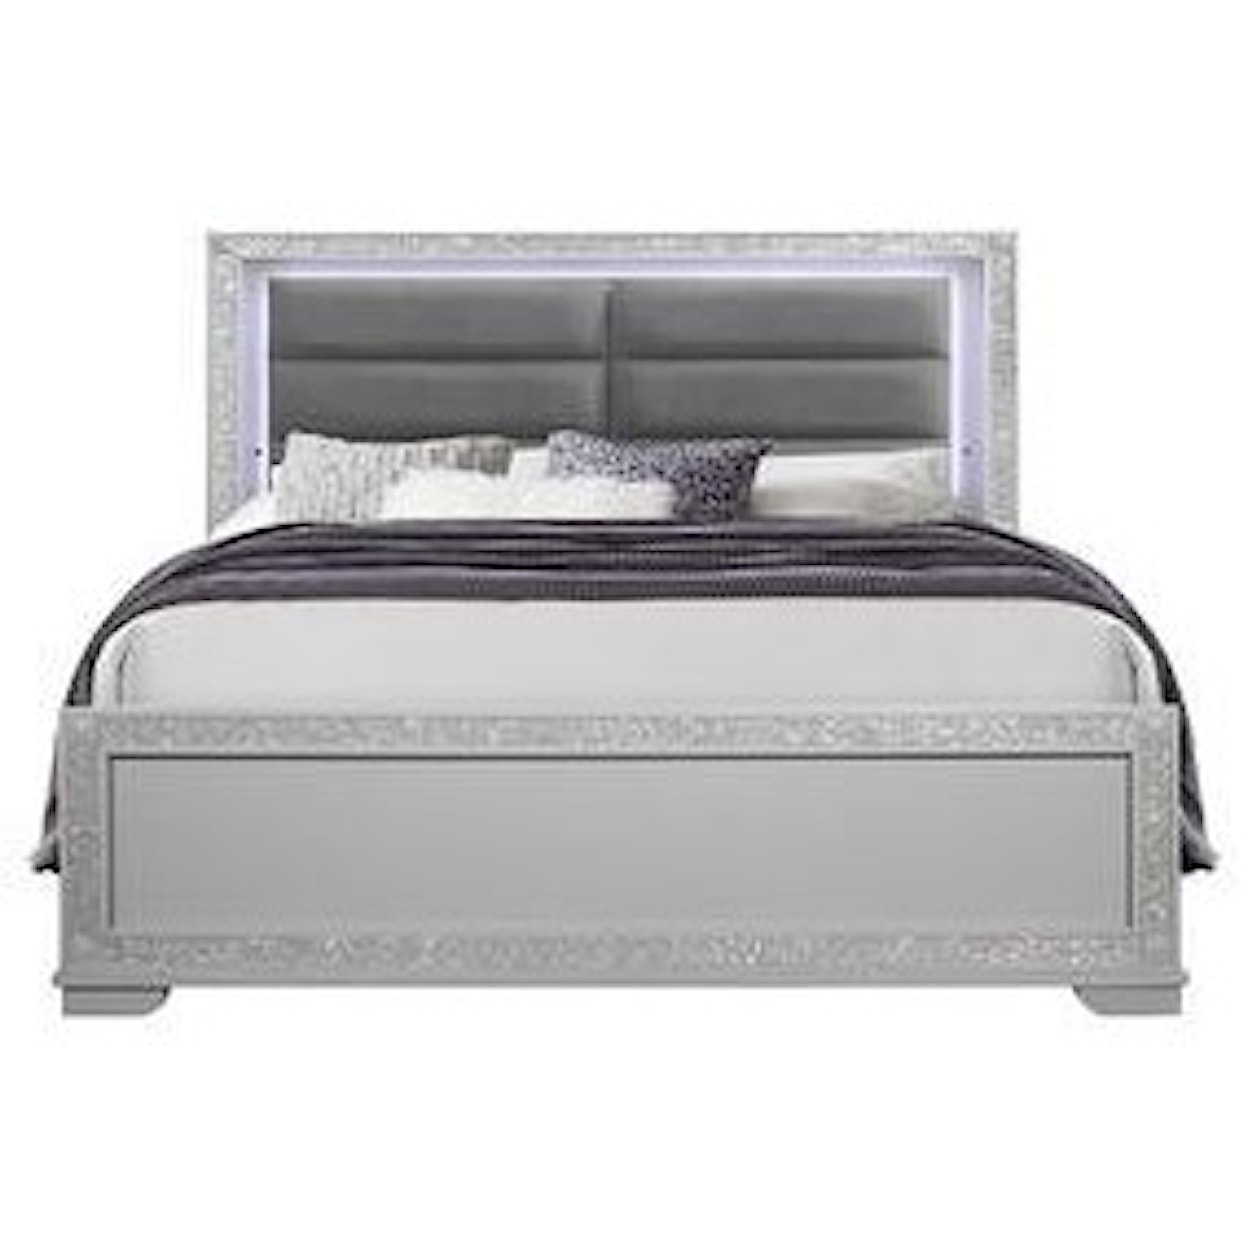 Global Furniture Chalice Silver King Bed